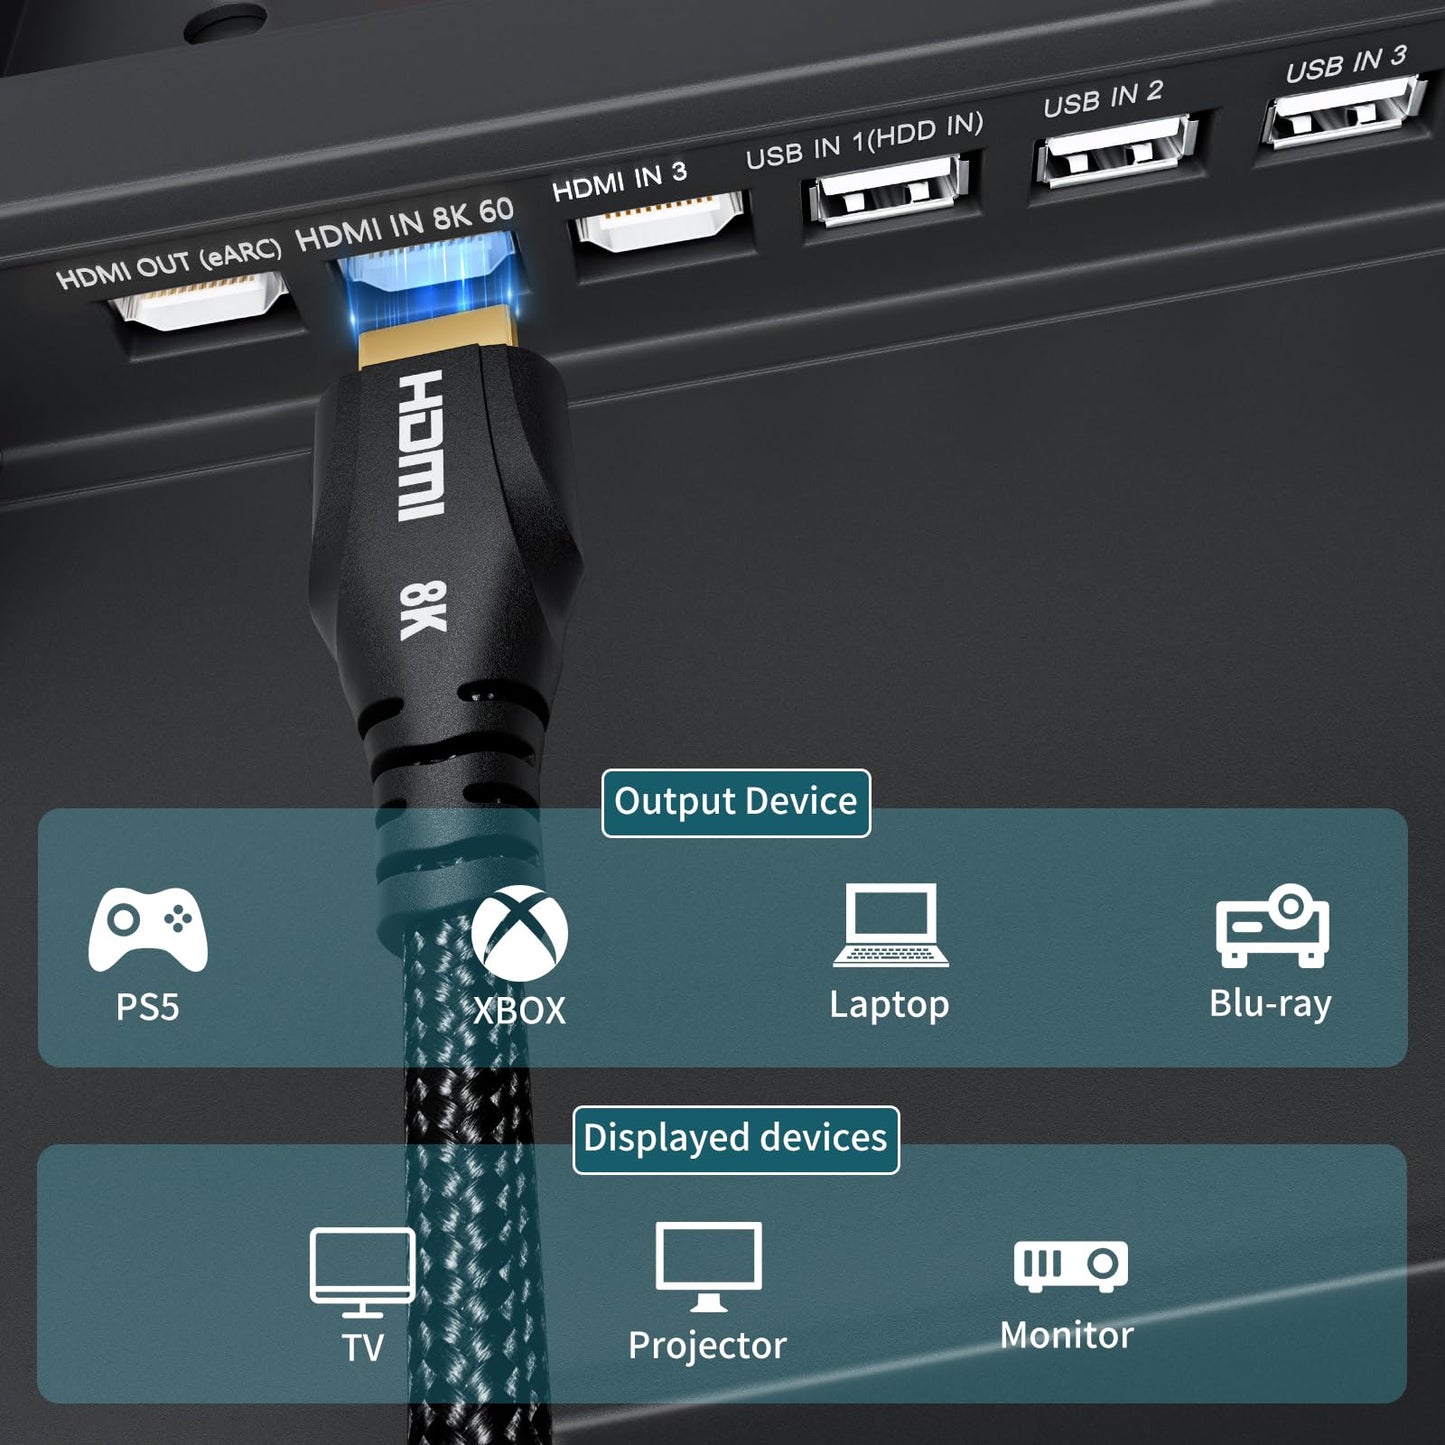 Cratree HDMI Cables 15FT Long - 8K Ultra High Speed HDMI Cable,48Gbps HDMI Braided Cord,8K 60hz,4K 120hz,eARC,HDCP 2.2&2.3 - Compatible for HDTV/PS5/Xbox